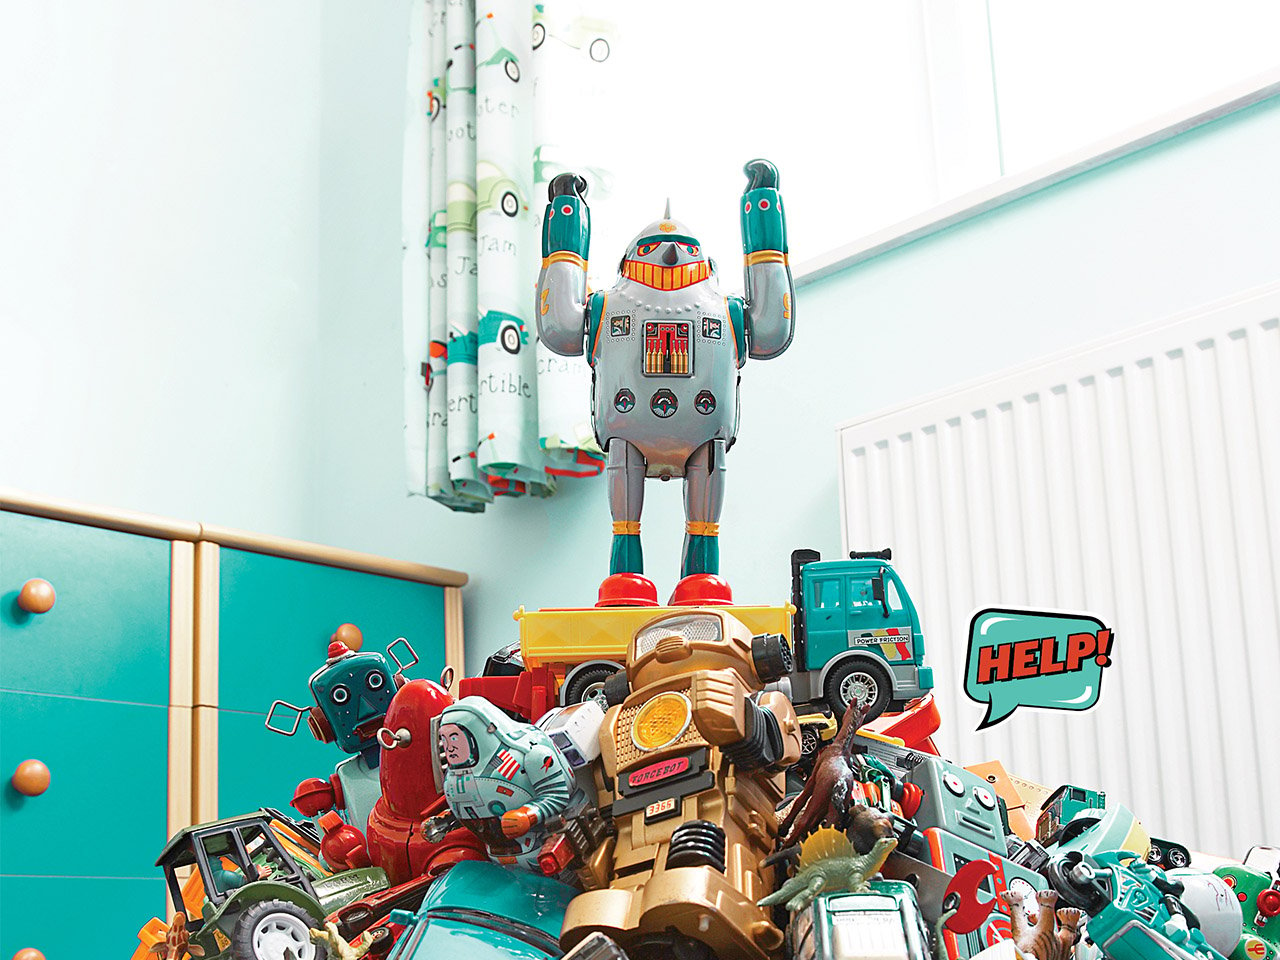 Toy robot standing on a pile of toys with his arms raised